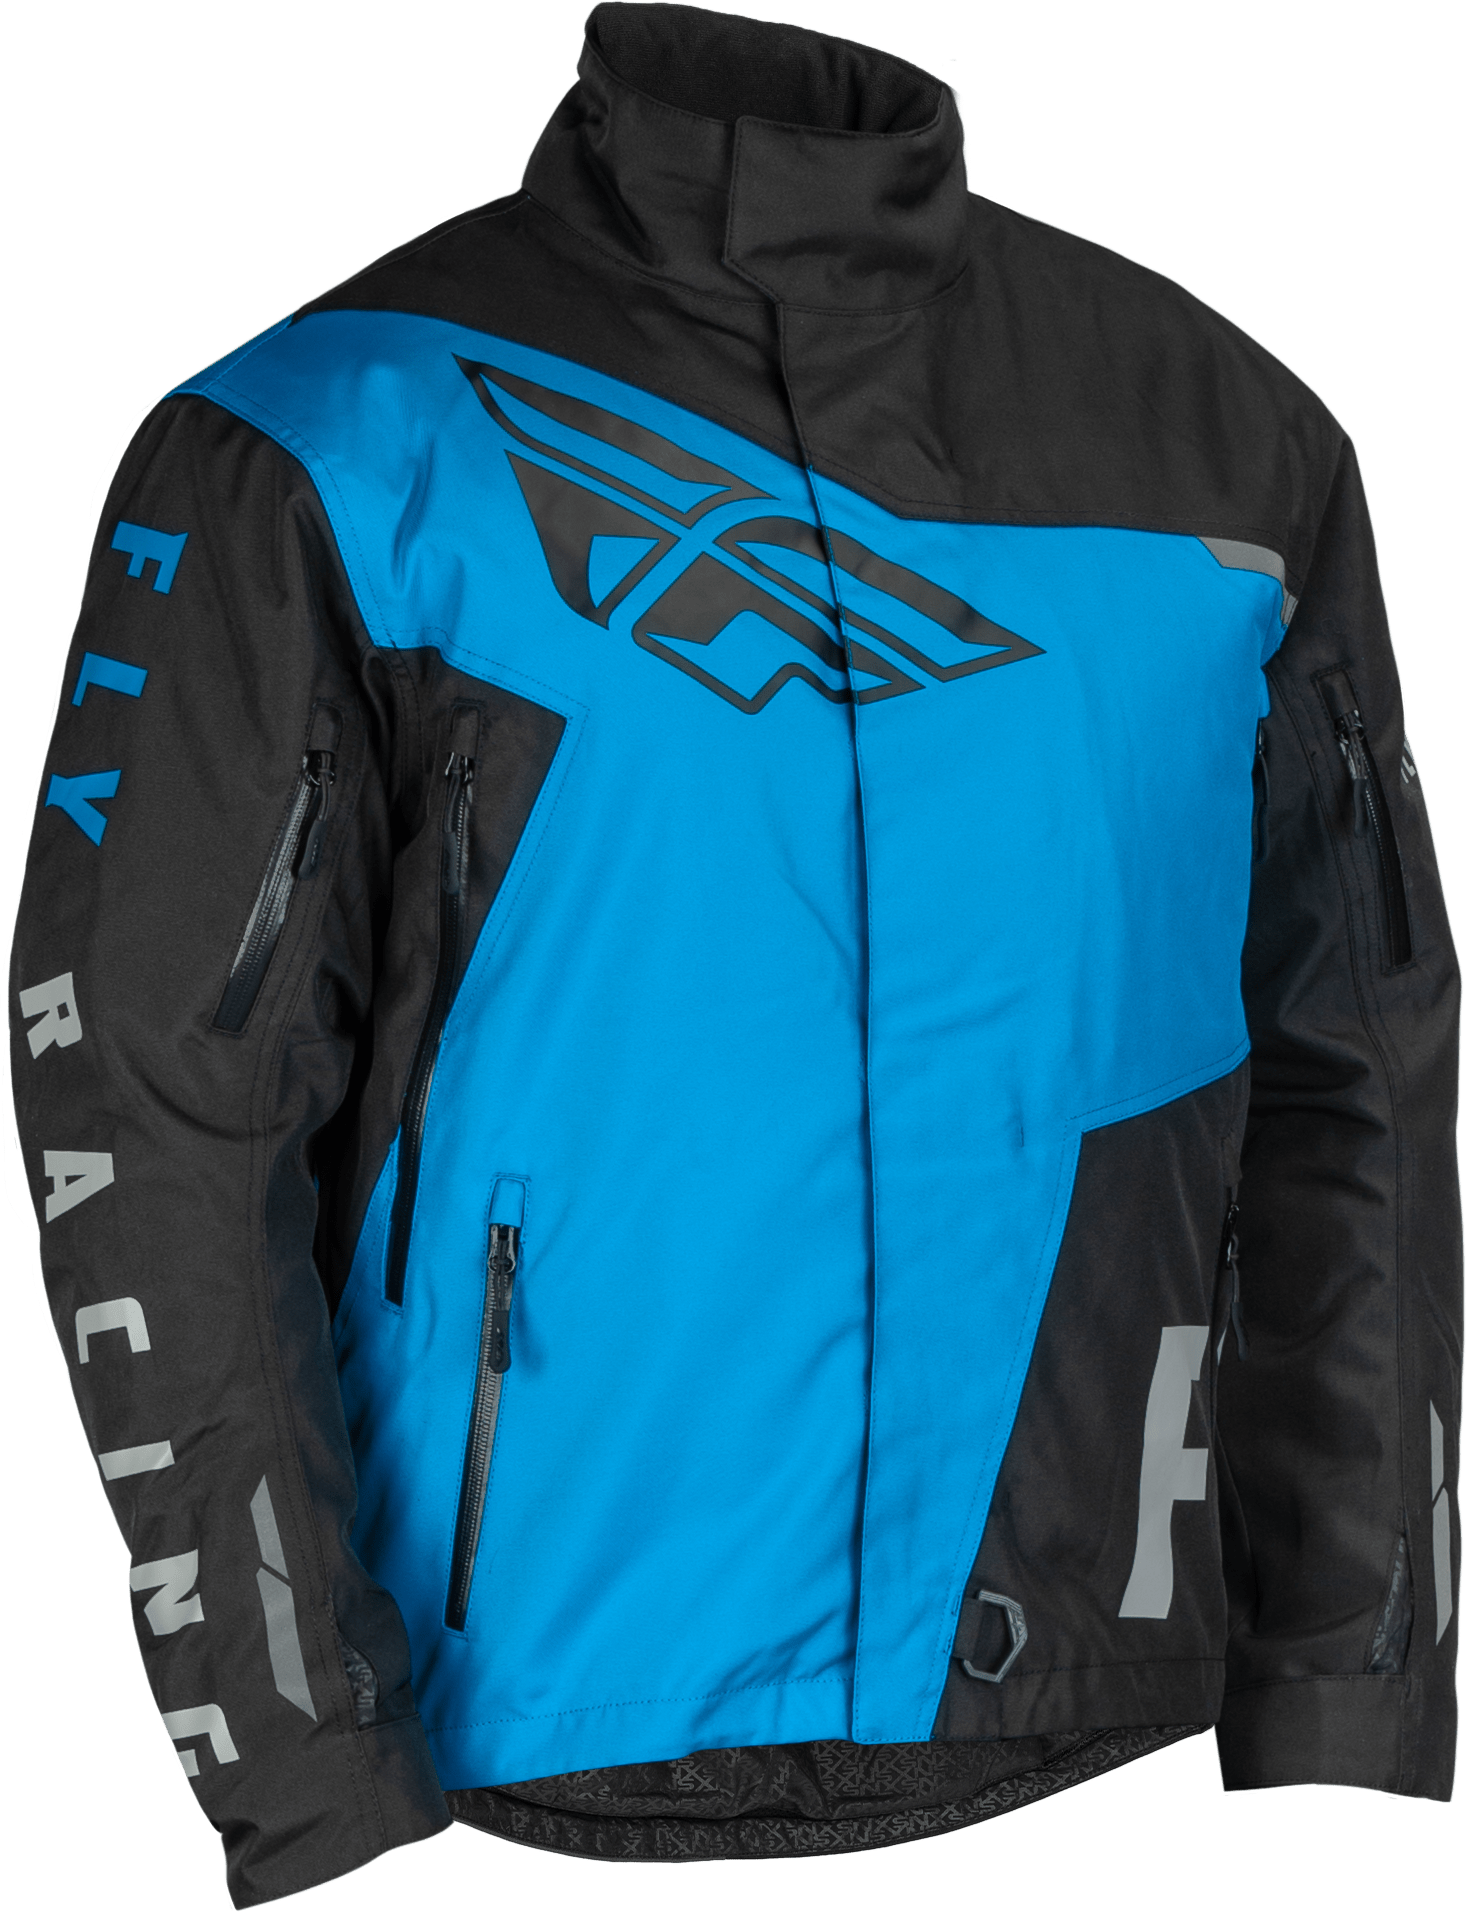 Western Powersports Jacket Black/Blue / Youth LG Youth Snx Pro Jacket By Fly Racing 470-5401YL